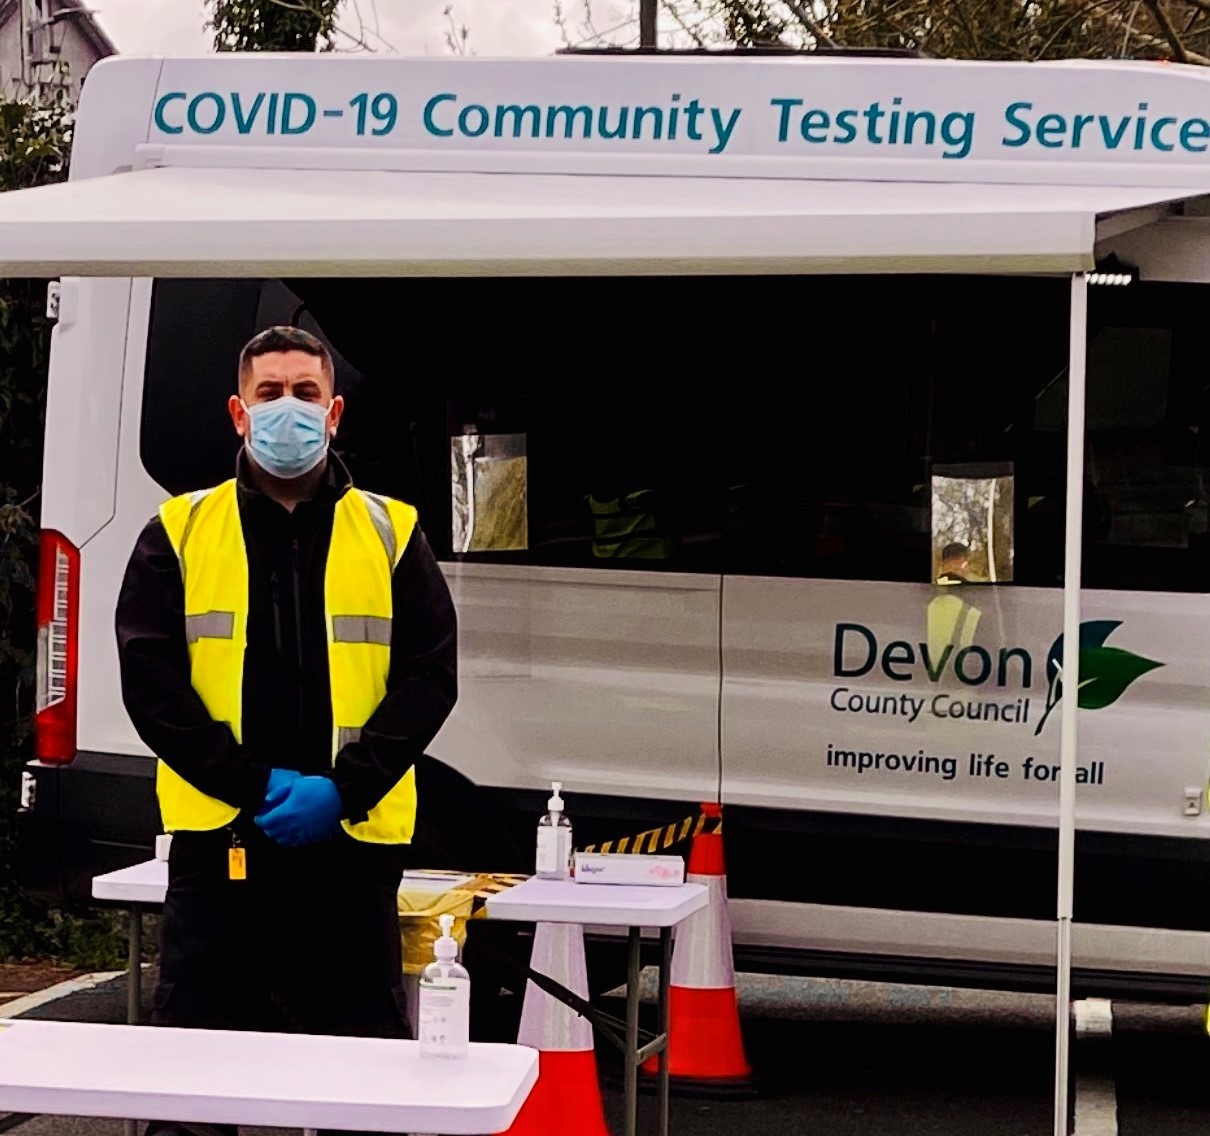 Our firefighter James stood in a mask, with gloves and a hi-vis jacket on in front of a Devon County Council testing van.